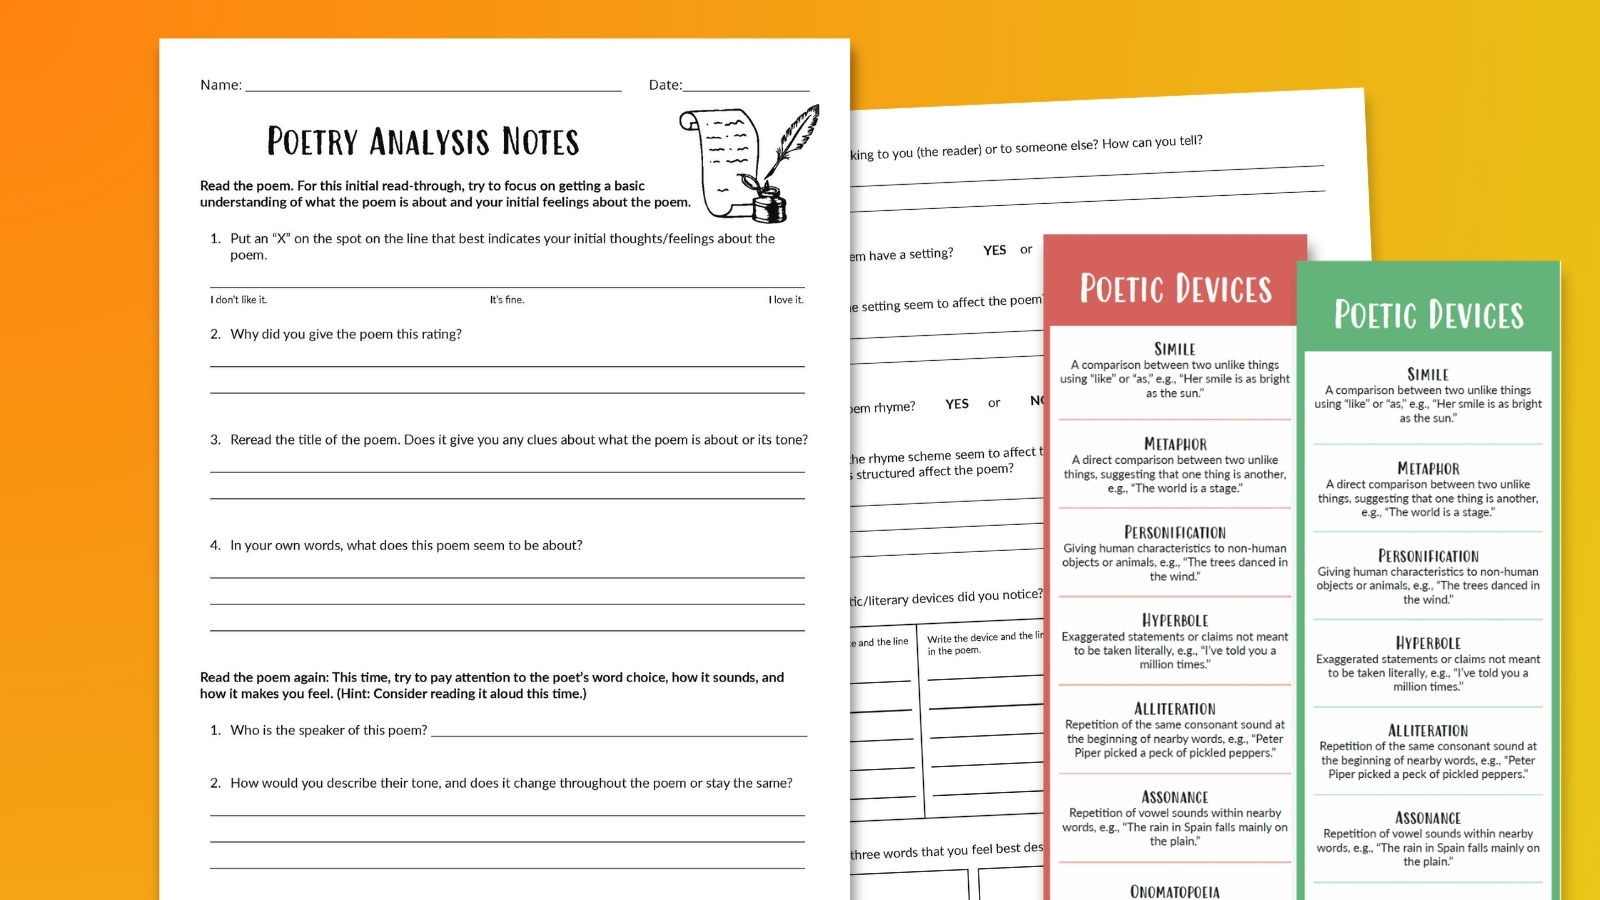 Images of the poetry analysis worksheet and bookmarks